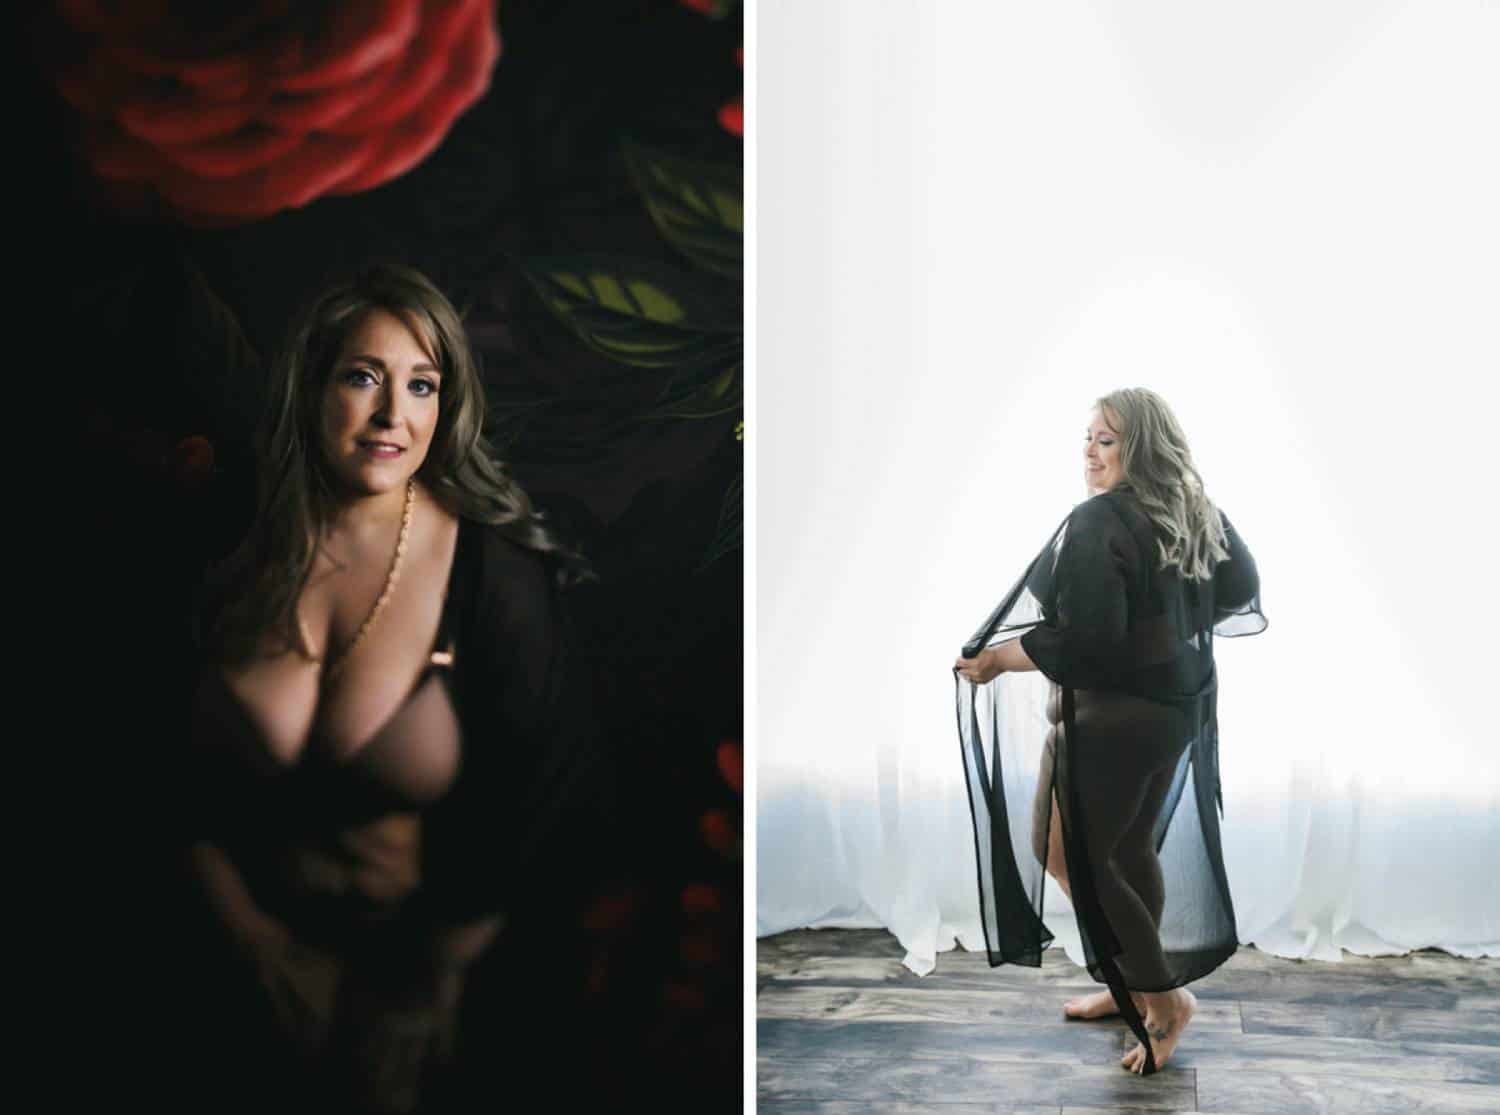 Learn how to take boudoir photos by reviewing images like these: a full-figured woman poses for her boudoir portraits, first in front of a dark background, then in front of a brightly-lit window.